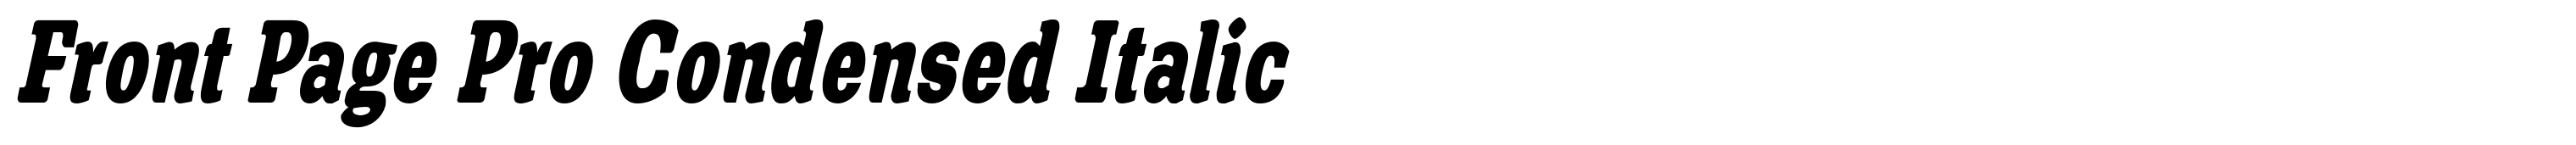 Front Page Pro Condensed Italic